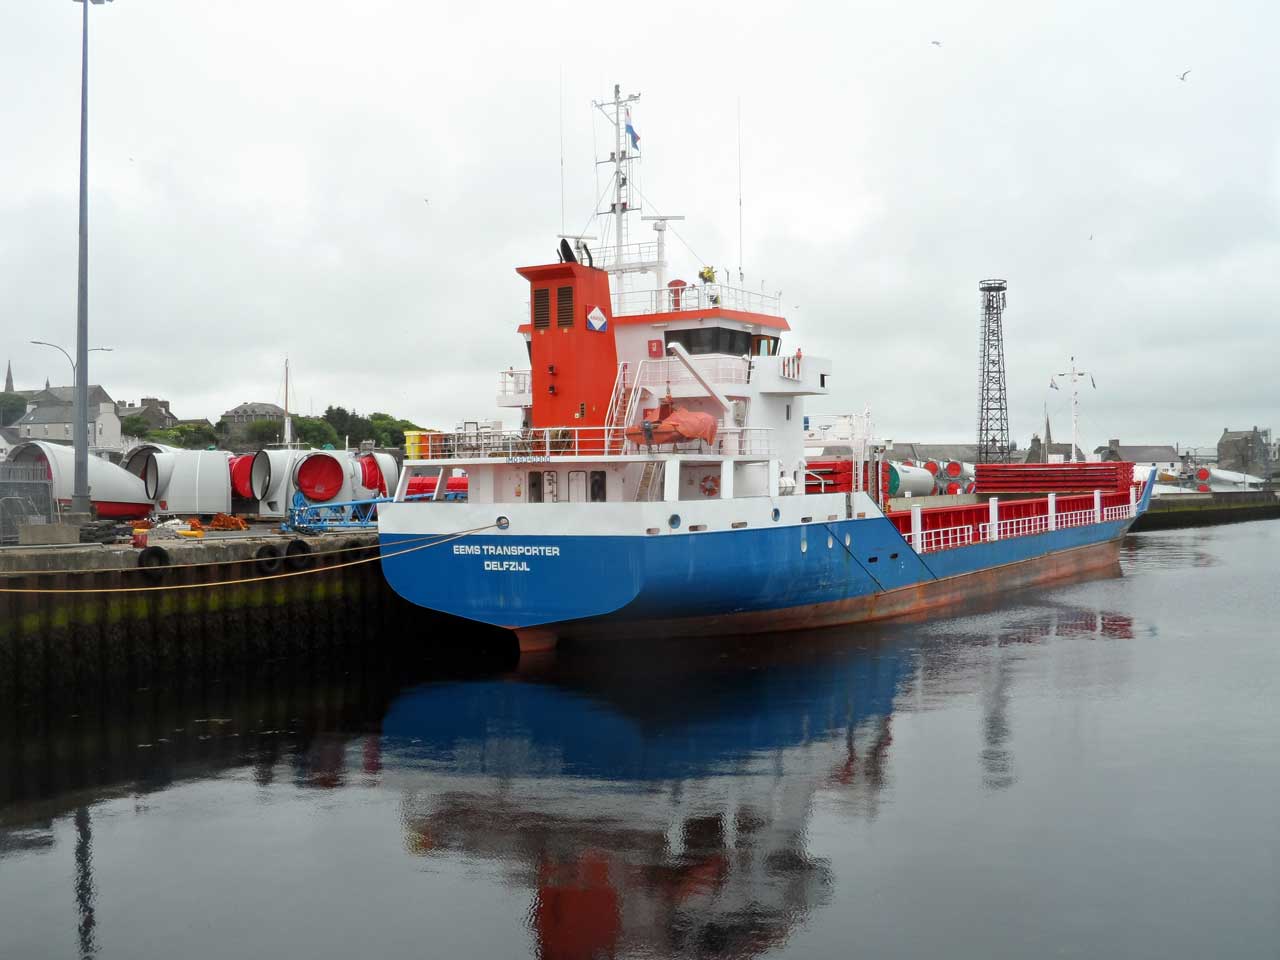 Photo: Turbines At Wick Harbour Bound For Lochend Wind Farm